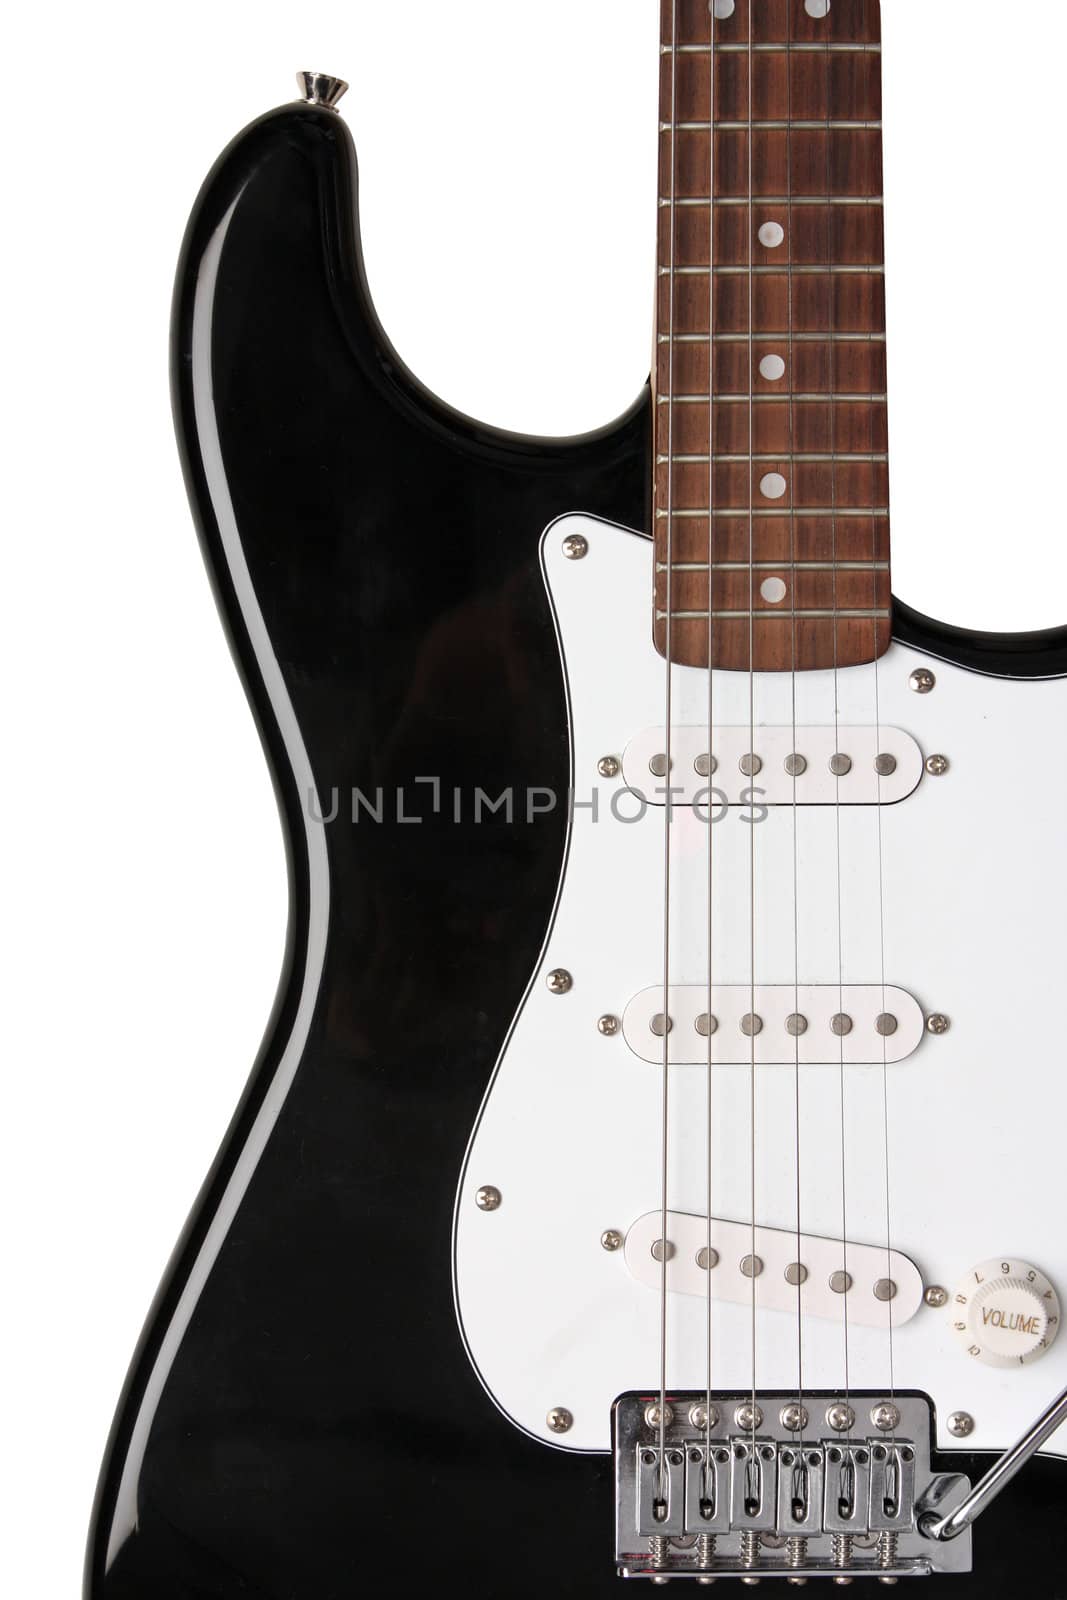 Electric guitar isolated on white. Beautiful instrument